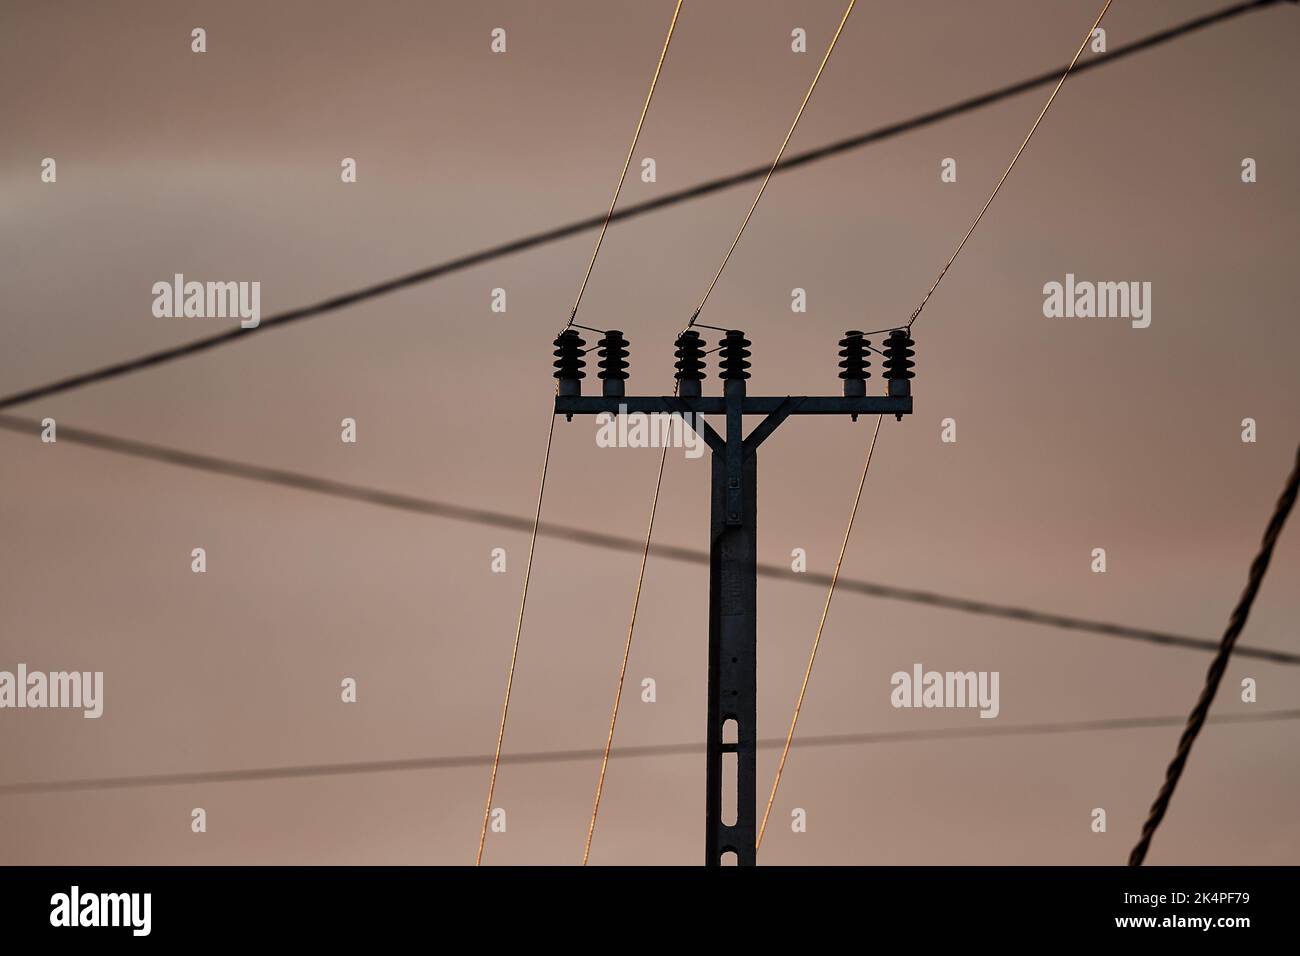 Electric line silhouettes Stock Photo